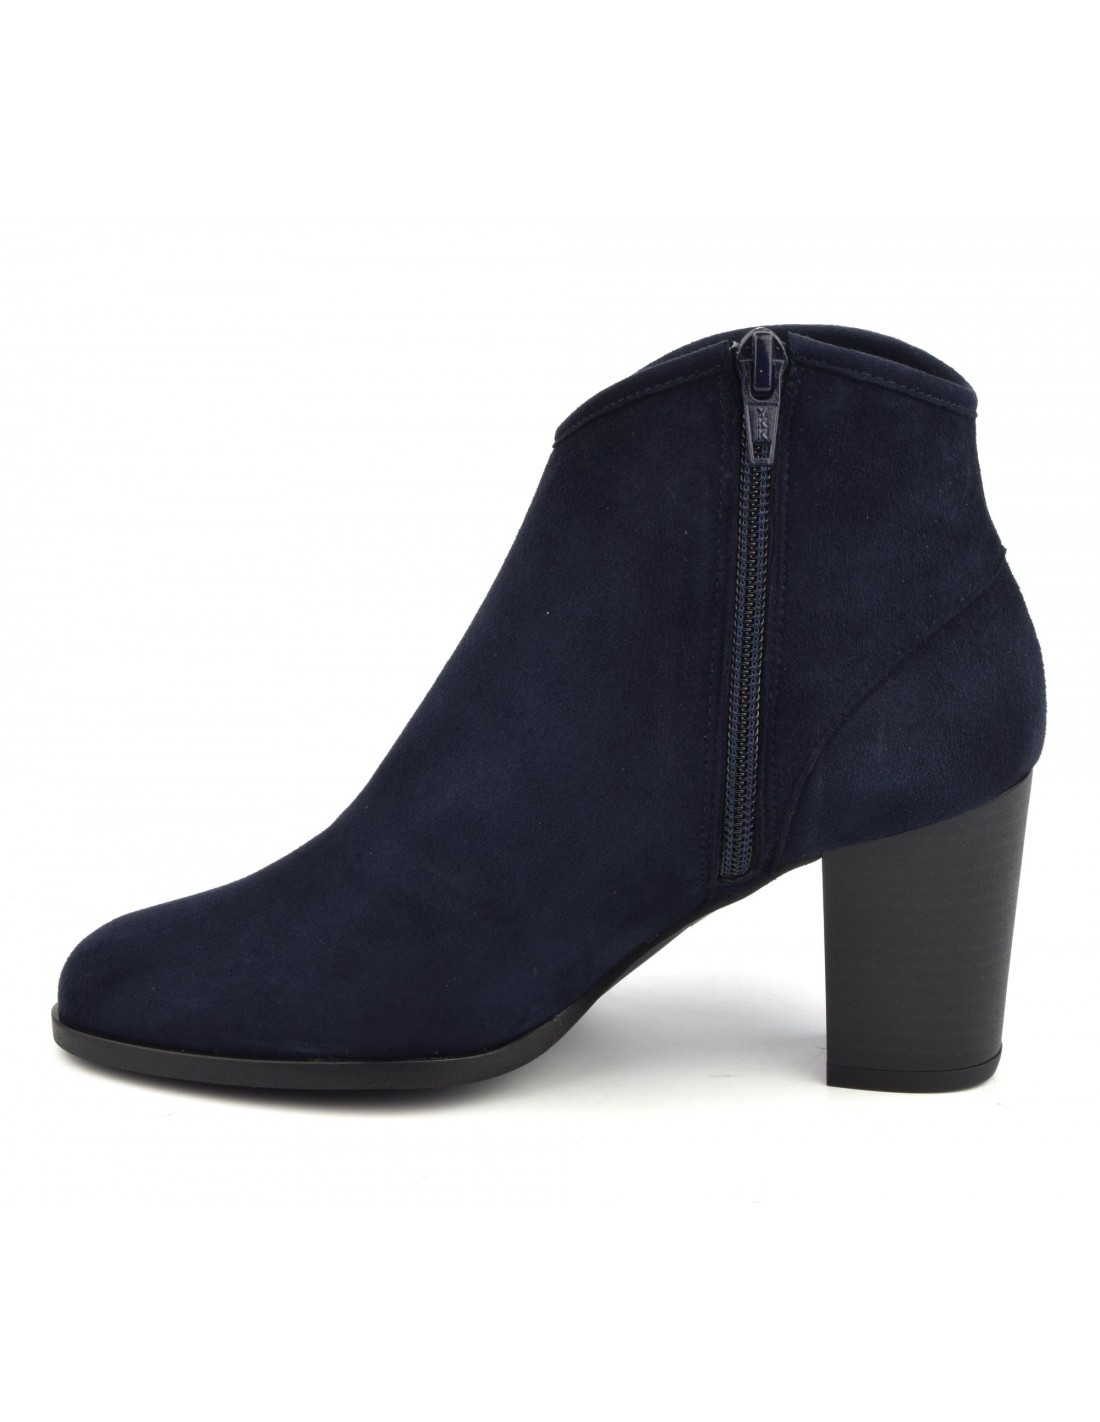 Navy blue suede leather ankle boots, FZ97586, Brenda Zaro